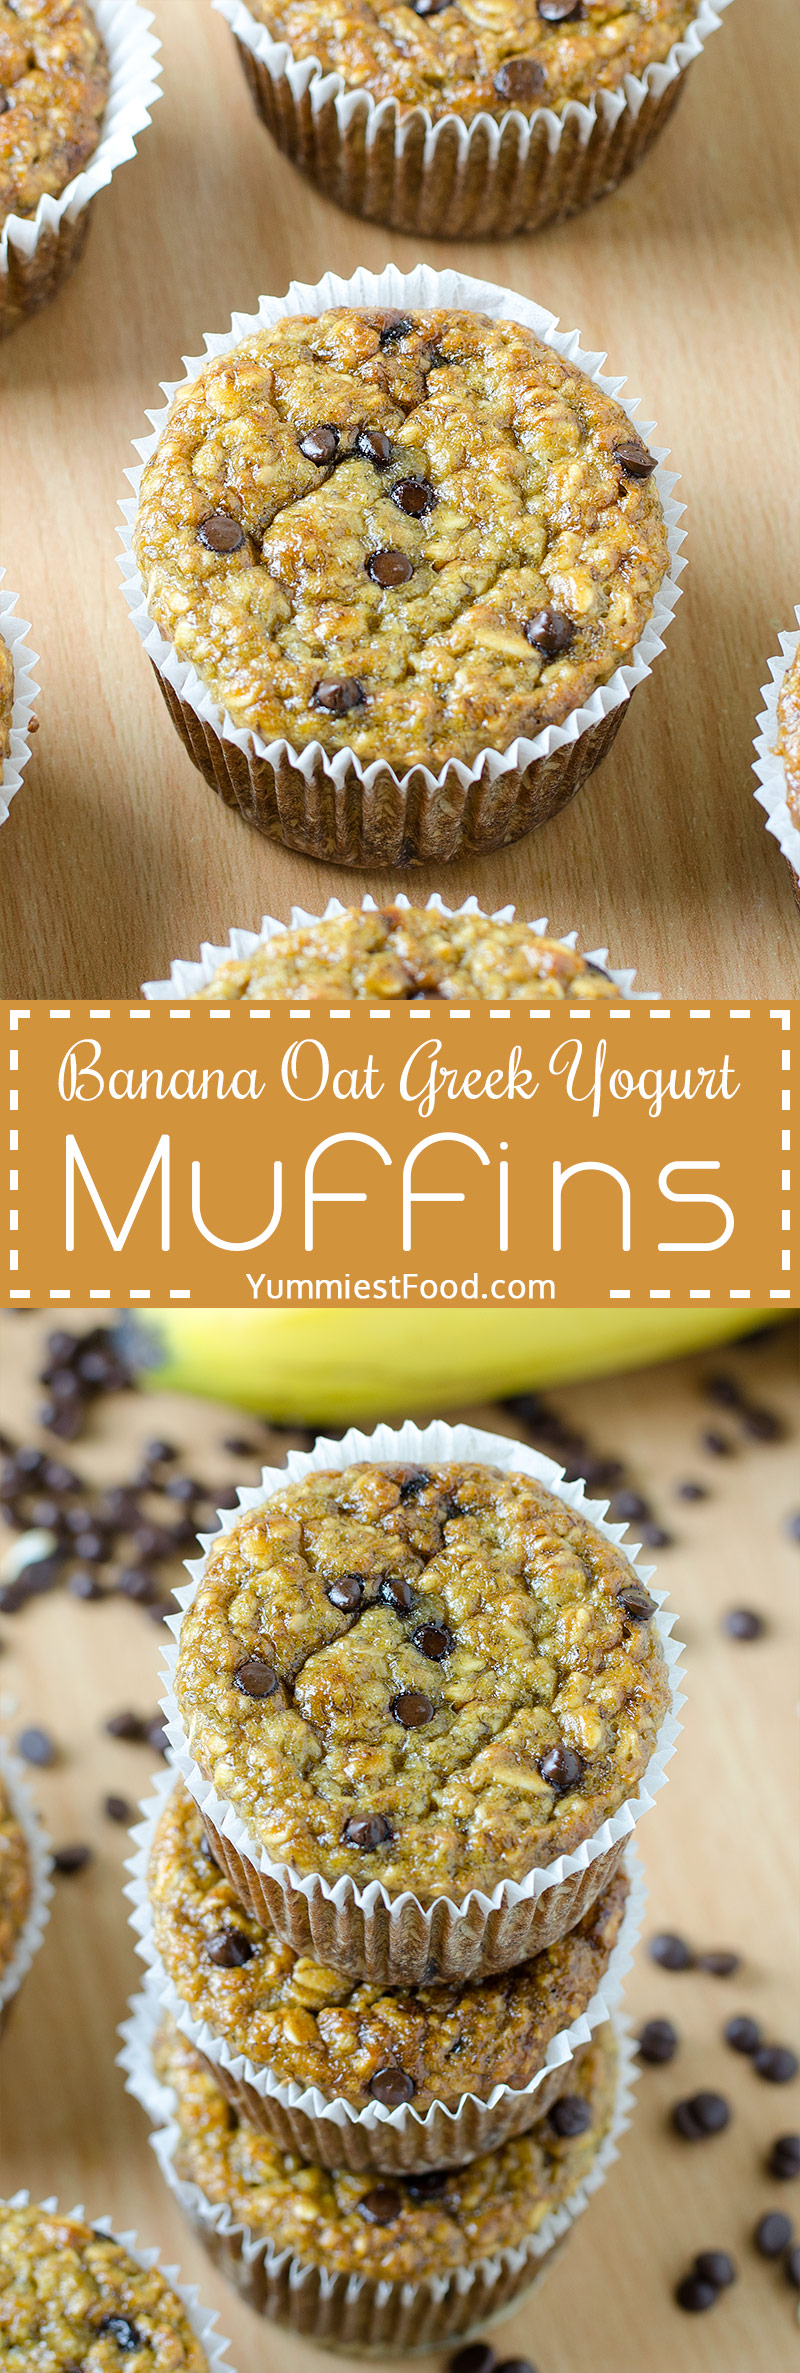 HEALTHY BANANA OAT GREEK YOGURT MUFFINS with CHOCOLATE CHIPS - Healthy, Easy muffins made in a blender